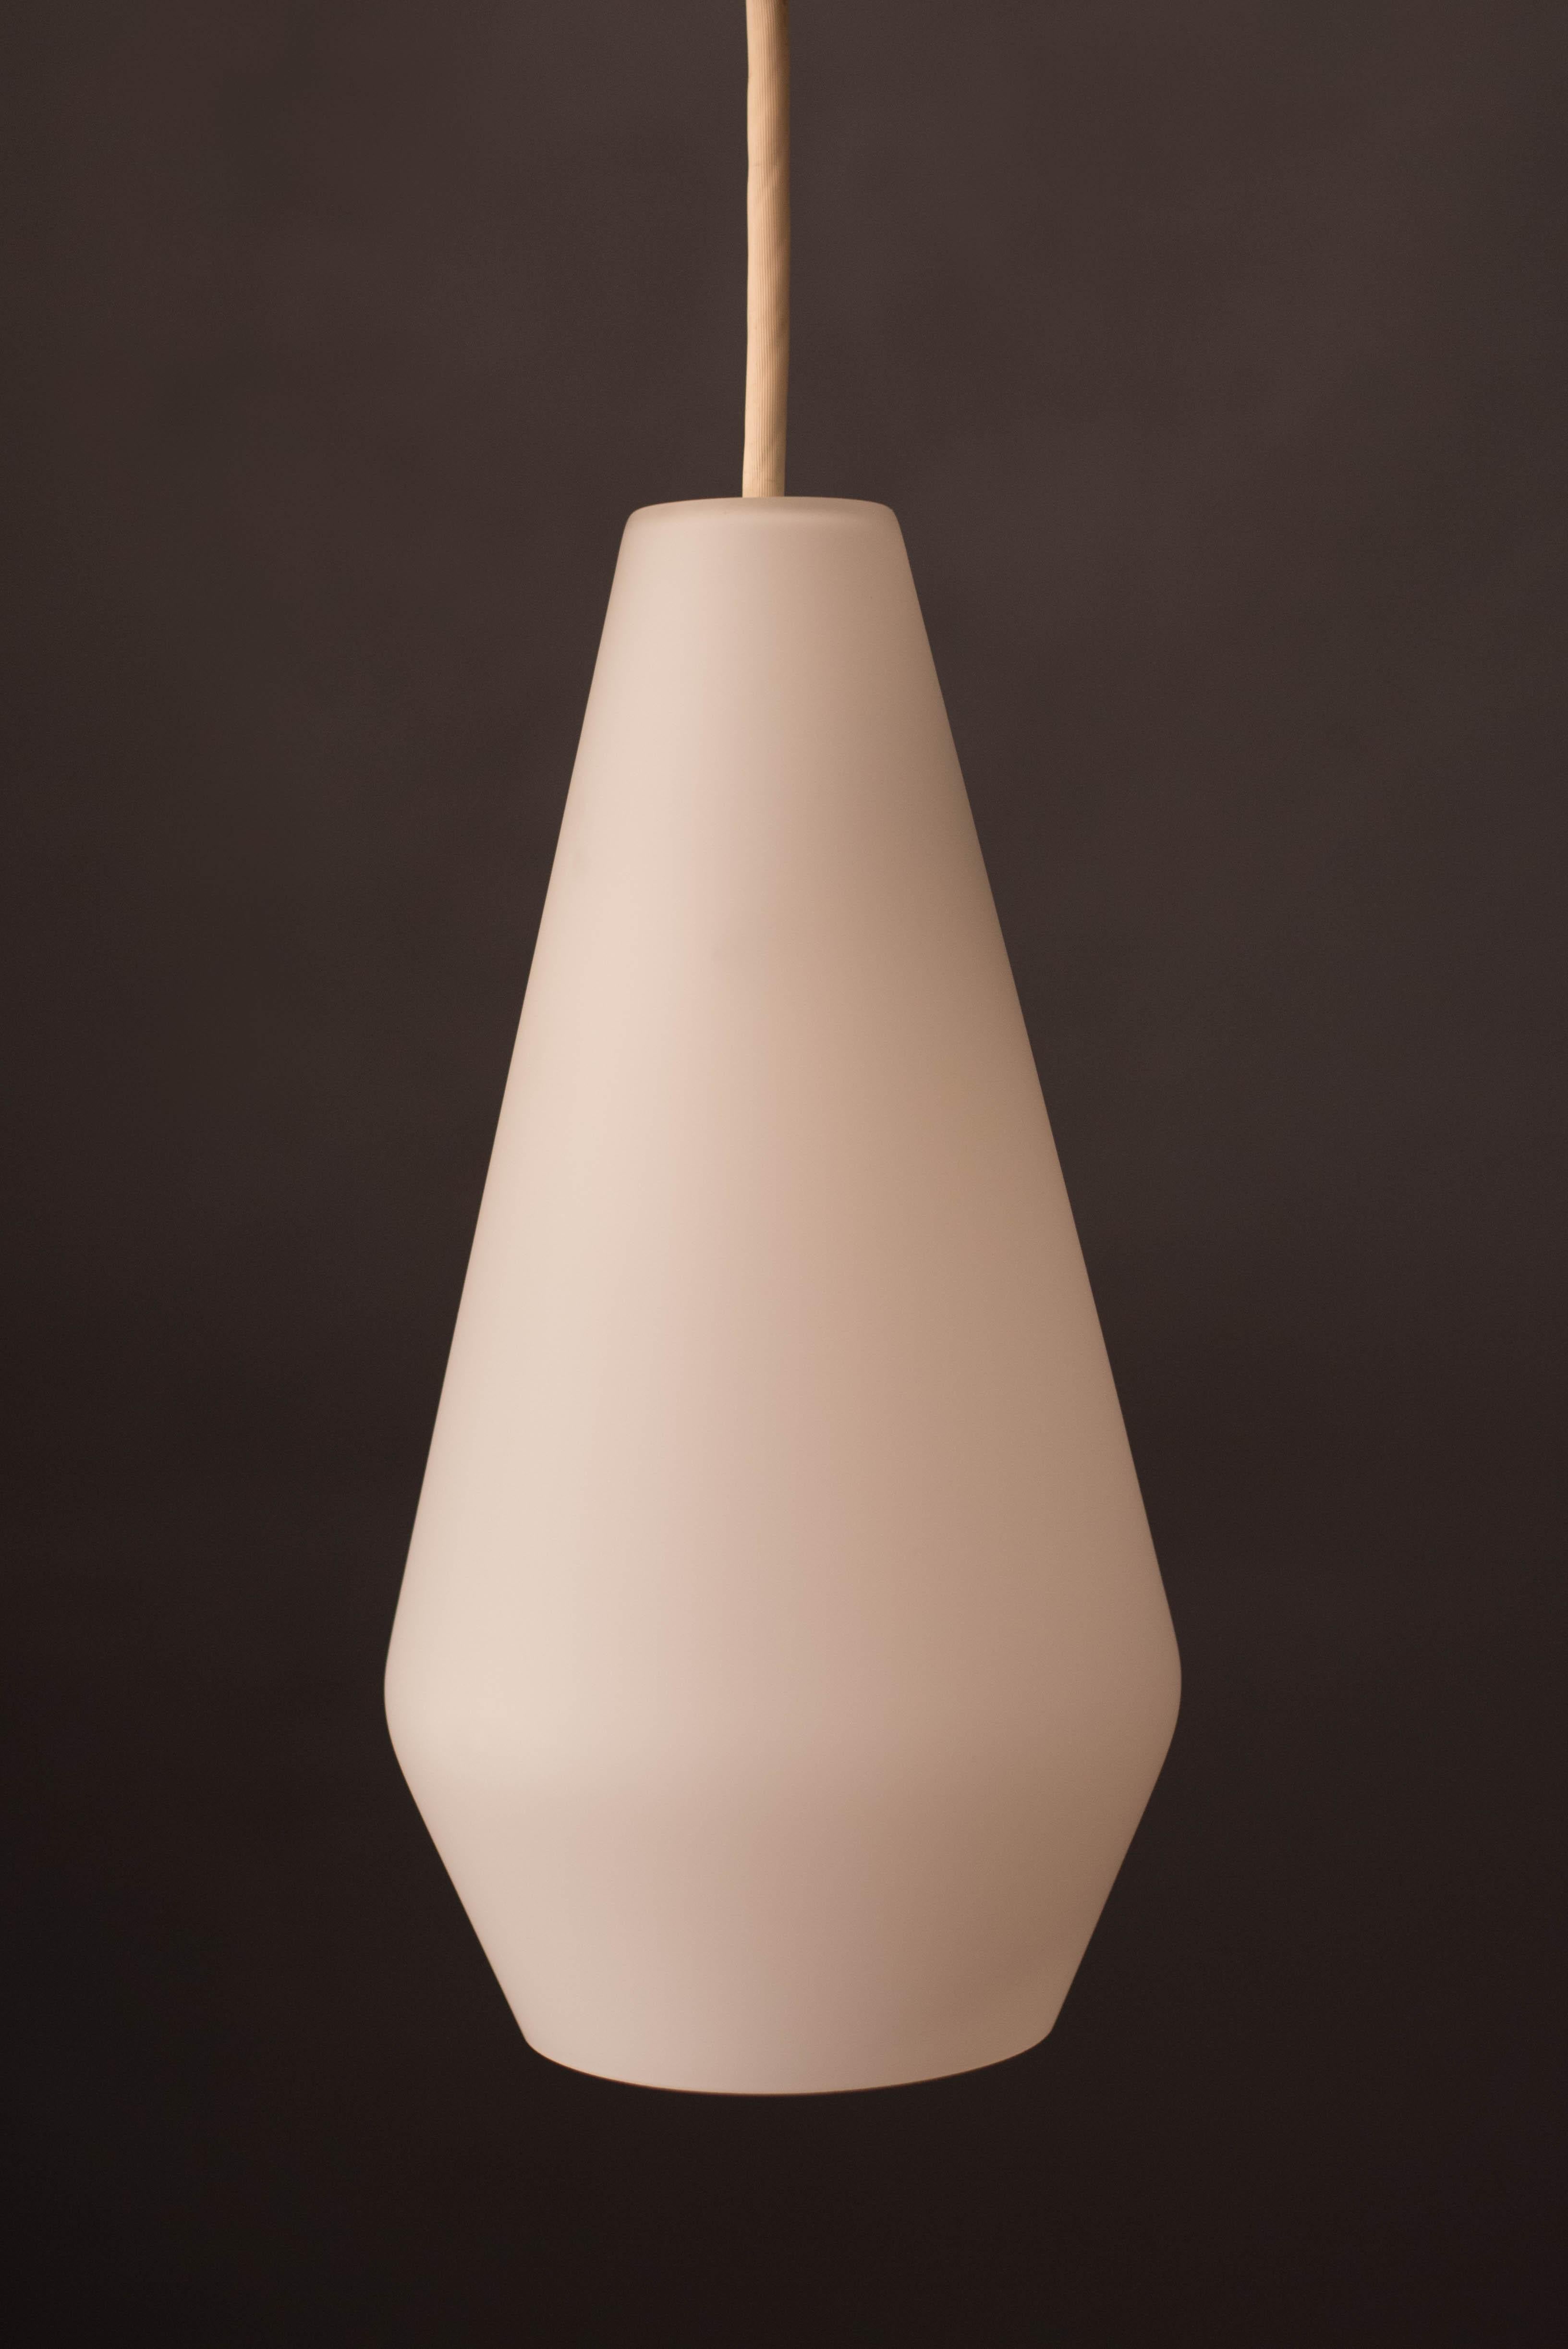 Mid-Century Modern ceiling pendant lamp manufactured by Lightolier circa 1960s. This unique shade is made of frosted glass that emits a glowing light. Perfect to use in the hallway, bedroom, or as lighting in the kitchen. Price is for each, two